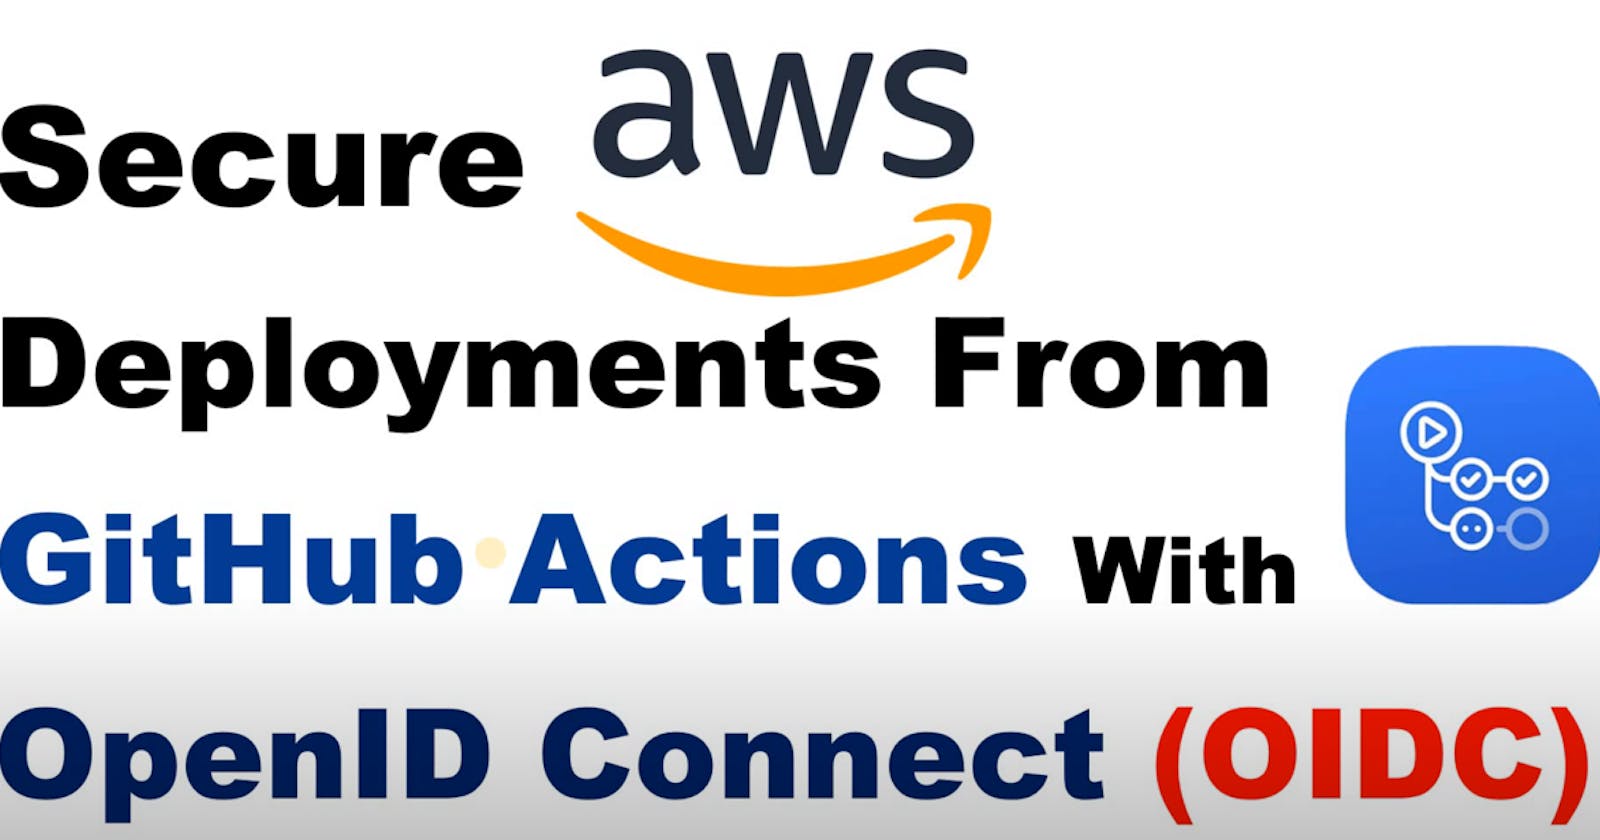 Connecting Github Actions to AWS using OpenID Connect(OIDC)